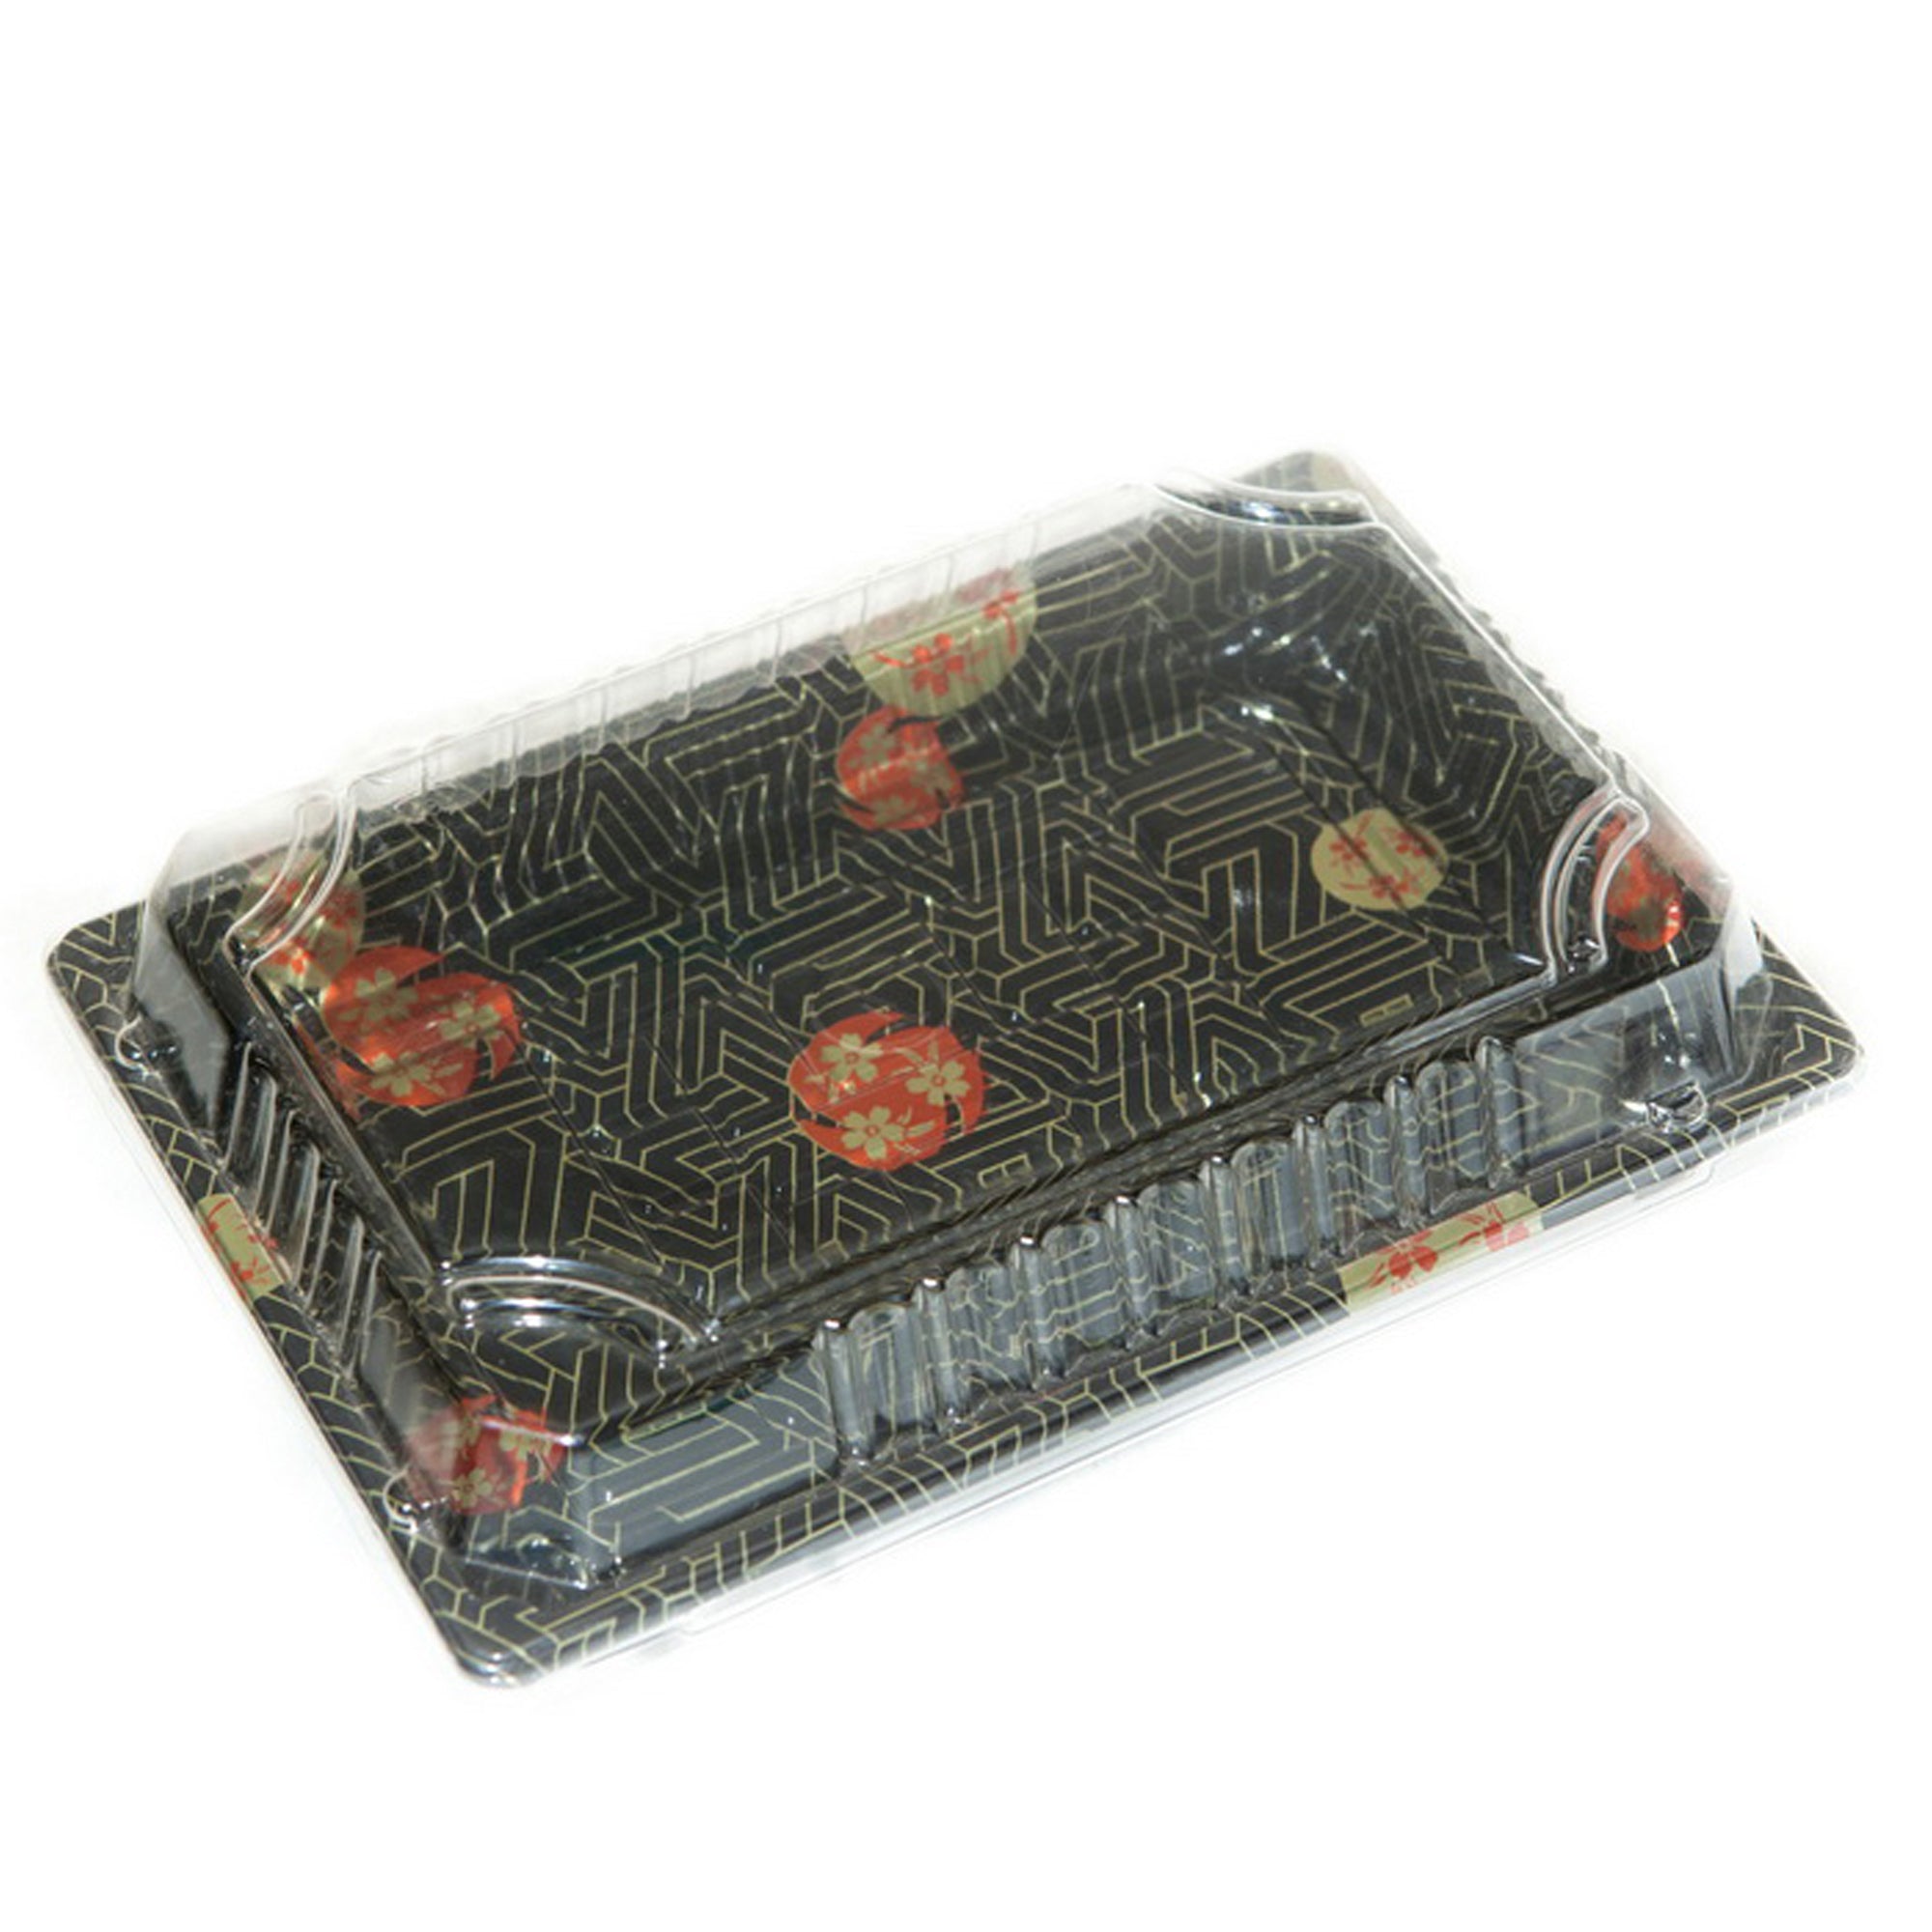 TZ-010 Disposable Black Sakura Design Take Out Sushi Trays with Clear Lids 7 3/8